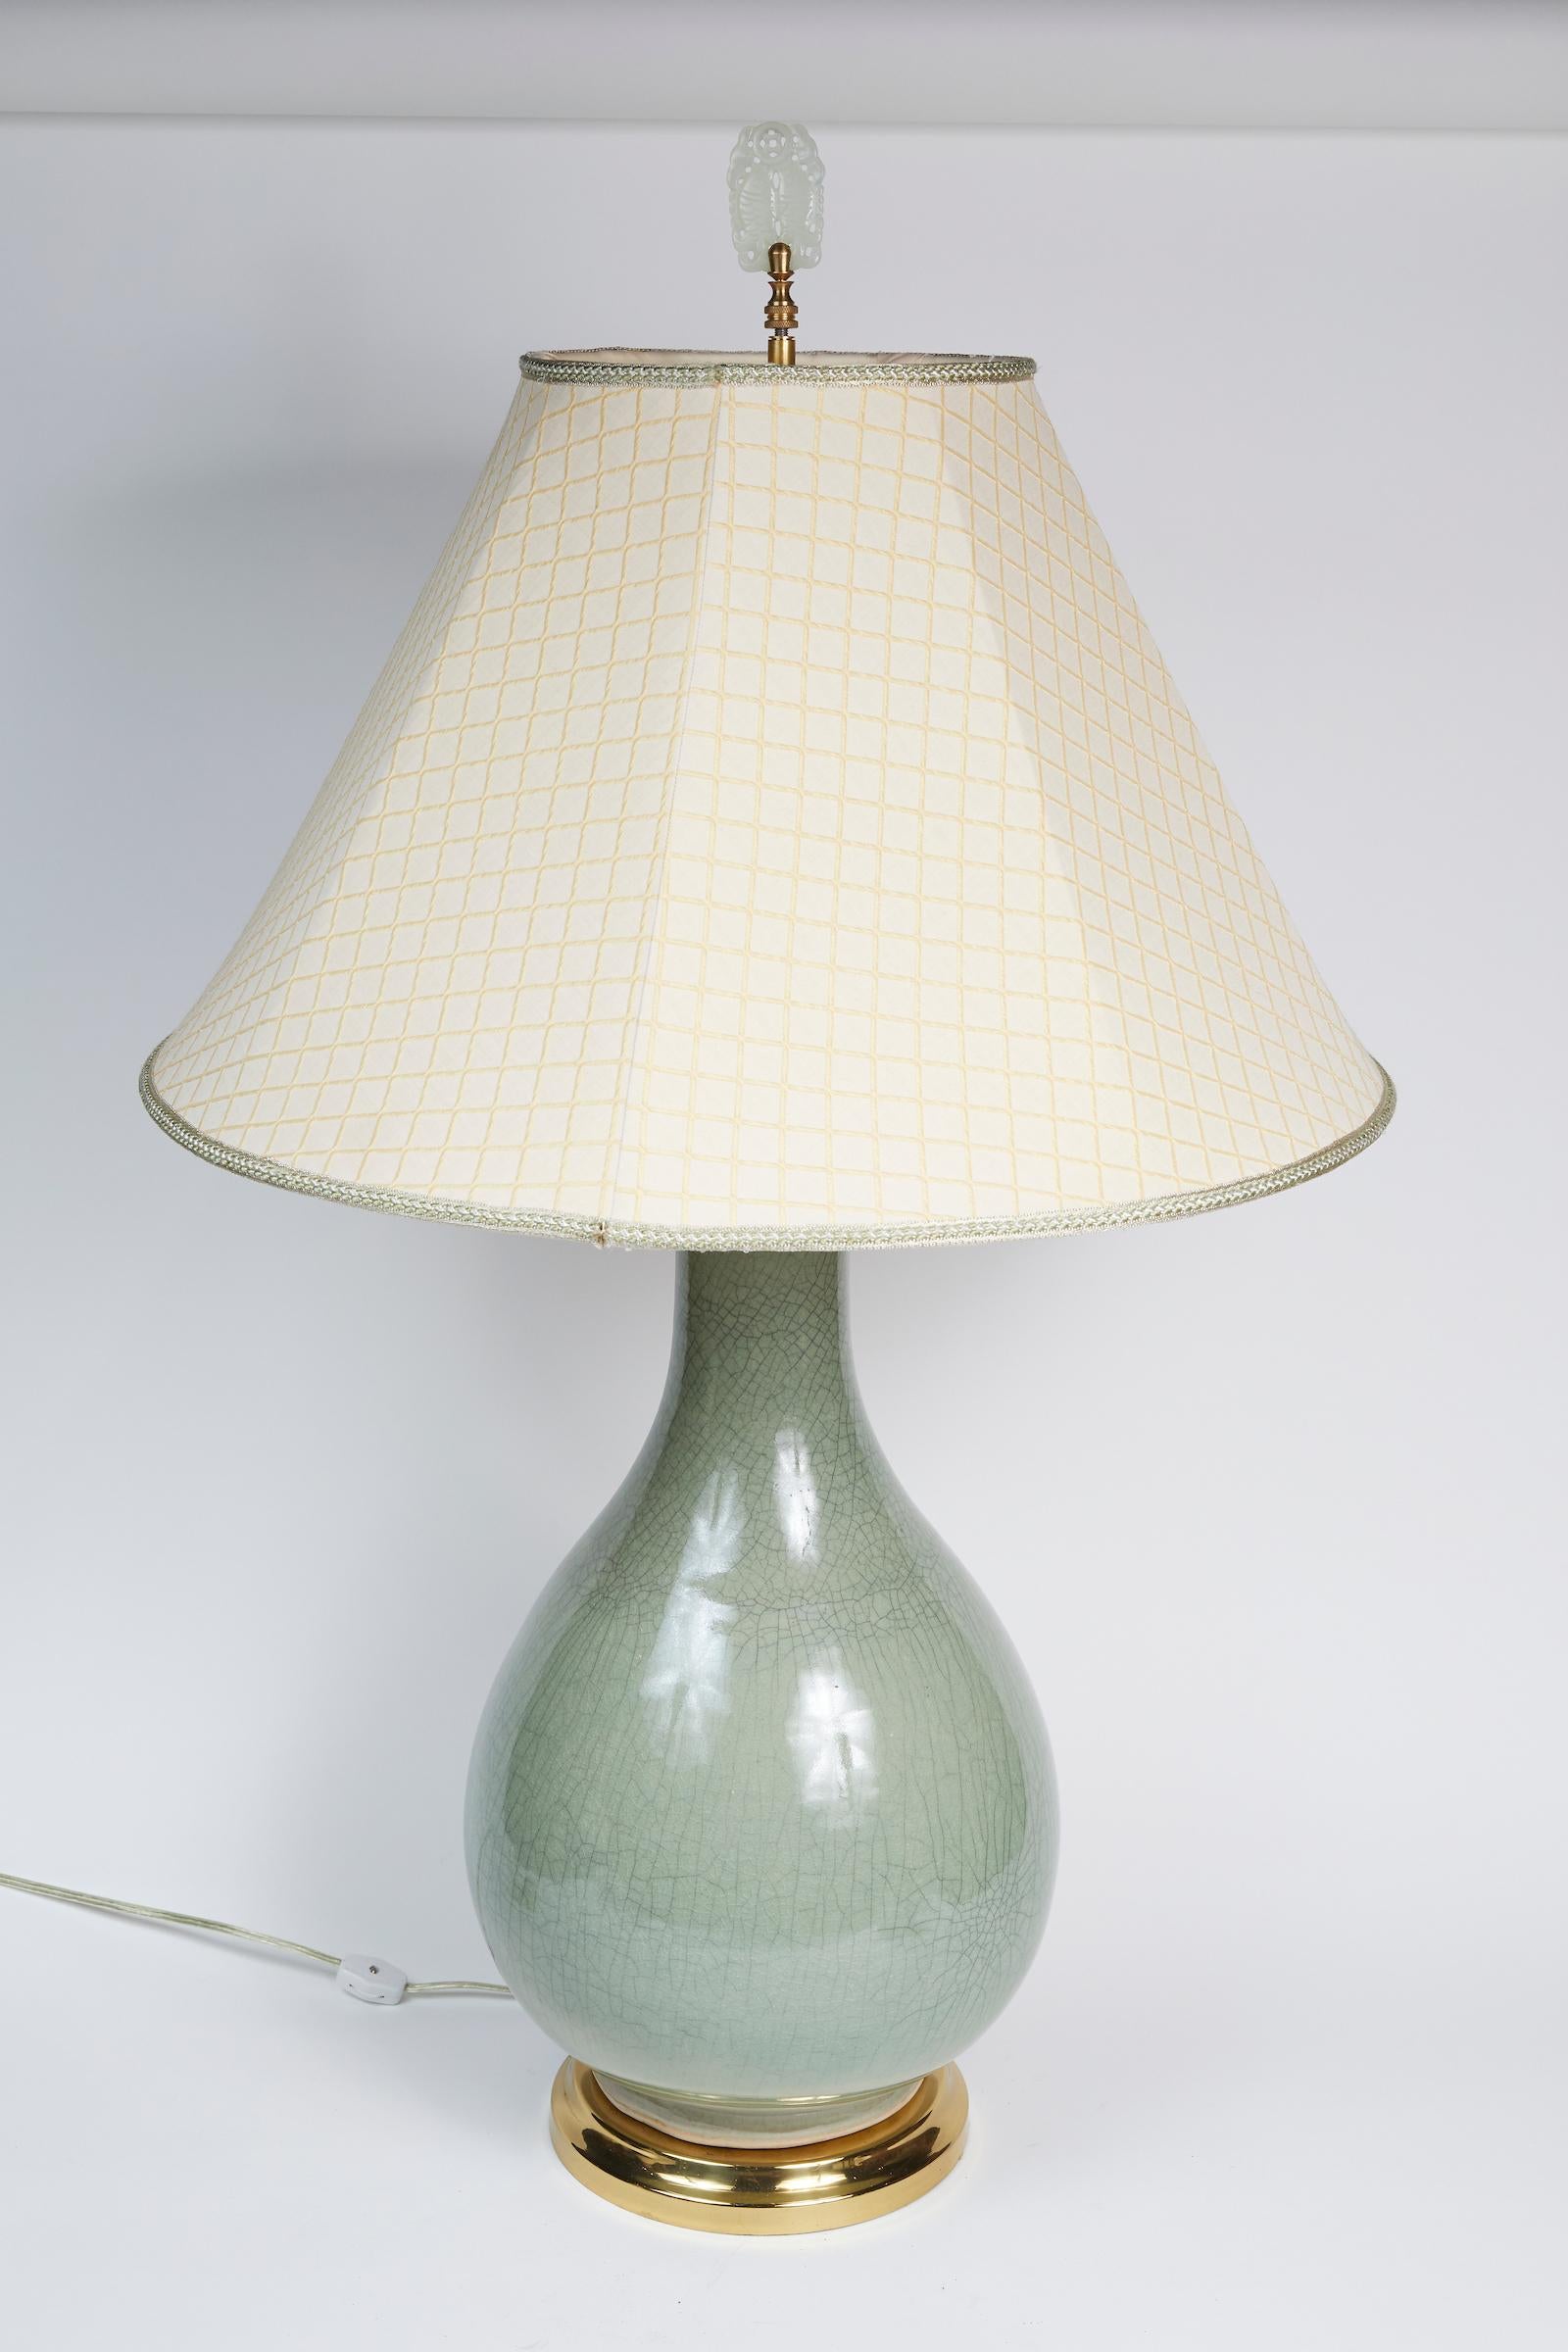 Elegant pair of Celadon crackle table lamps with Asian finial and resting on a brass base.